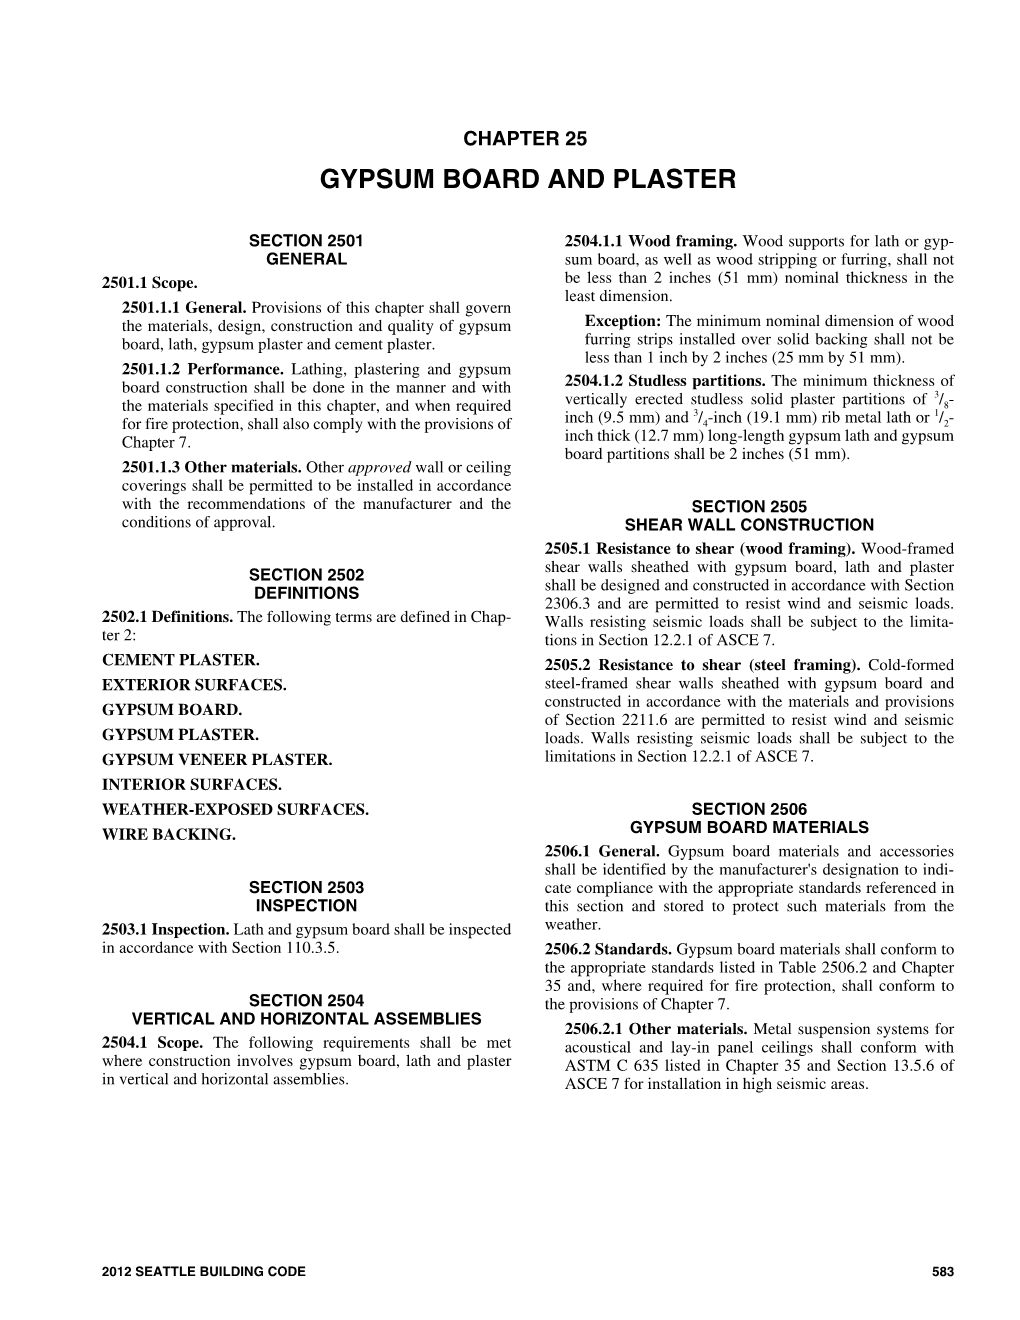 2012 Seattle Building Code, Chapter 25 Gypsum Board and Plaster